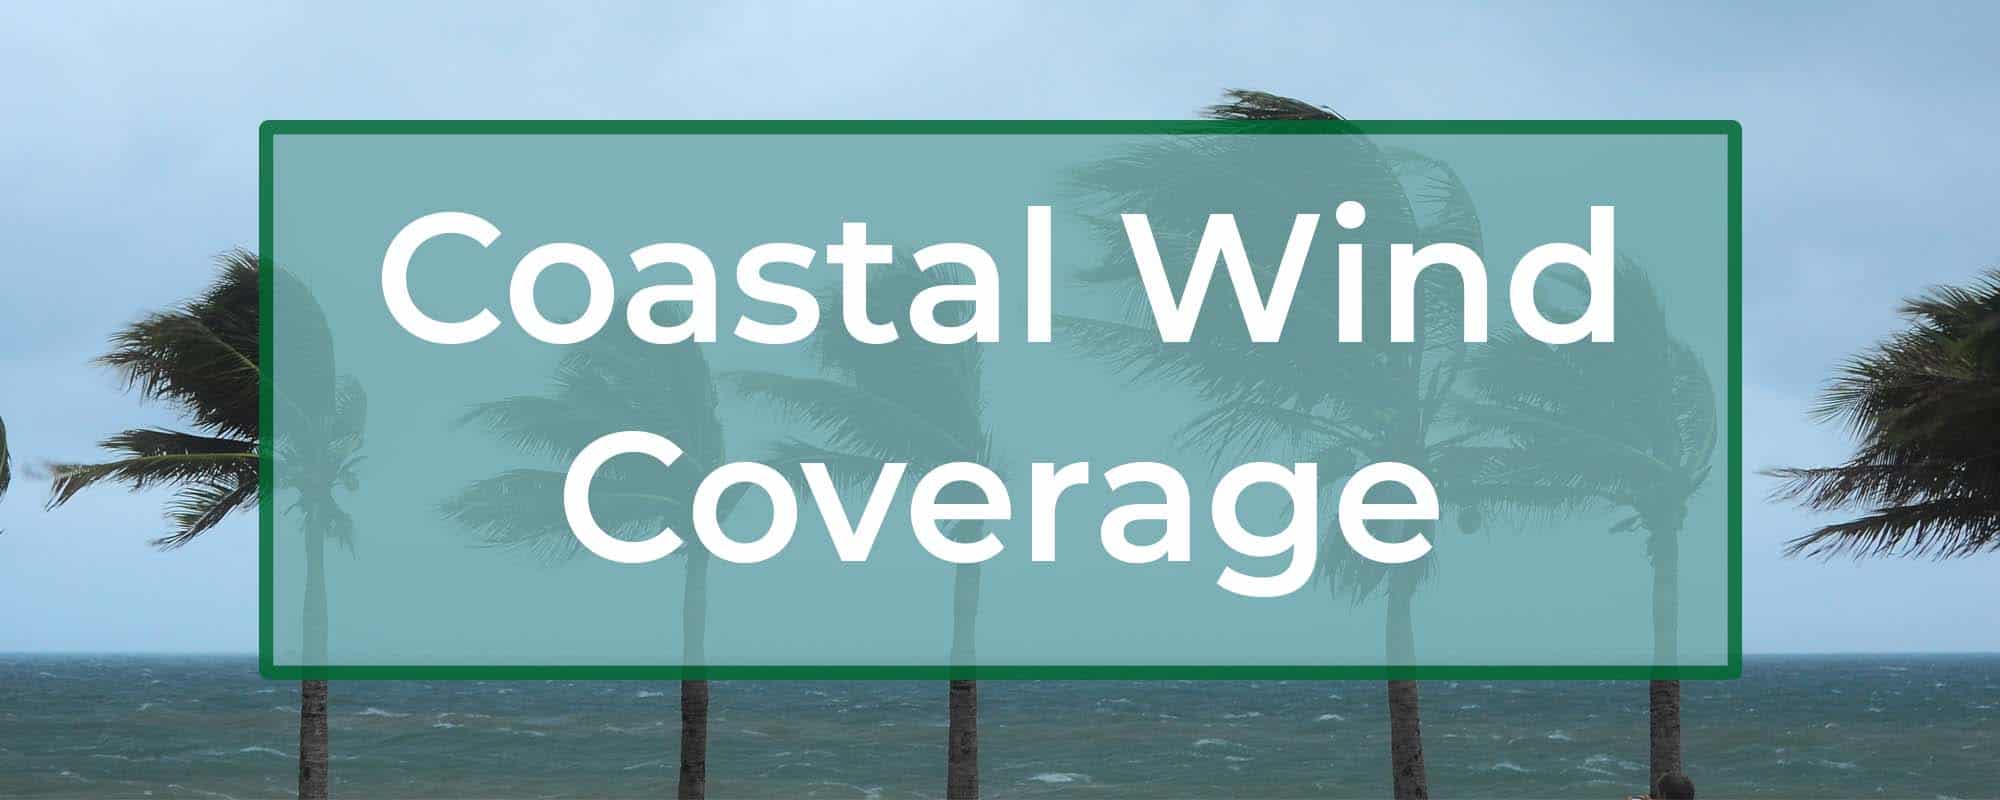 Featured image for “Coastal Wind Coverage”